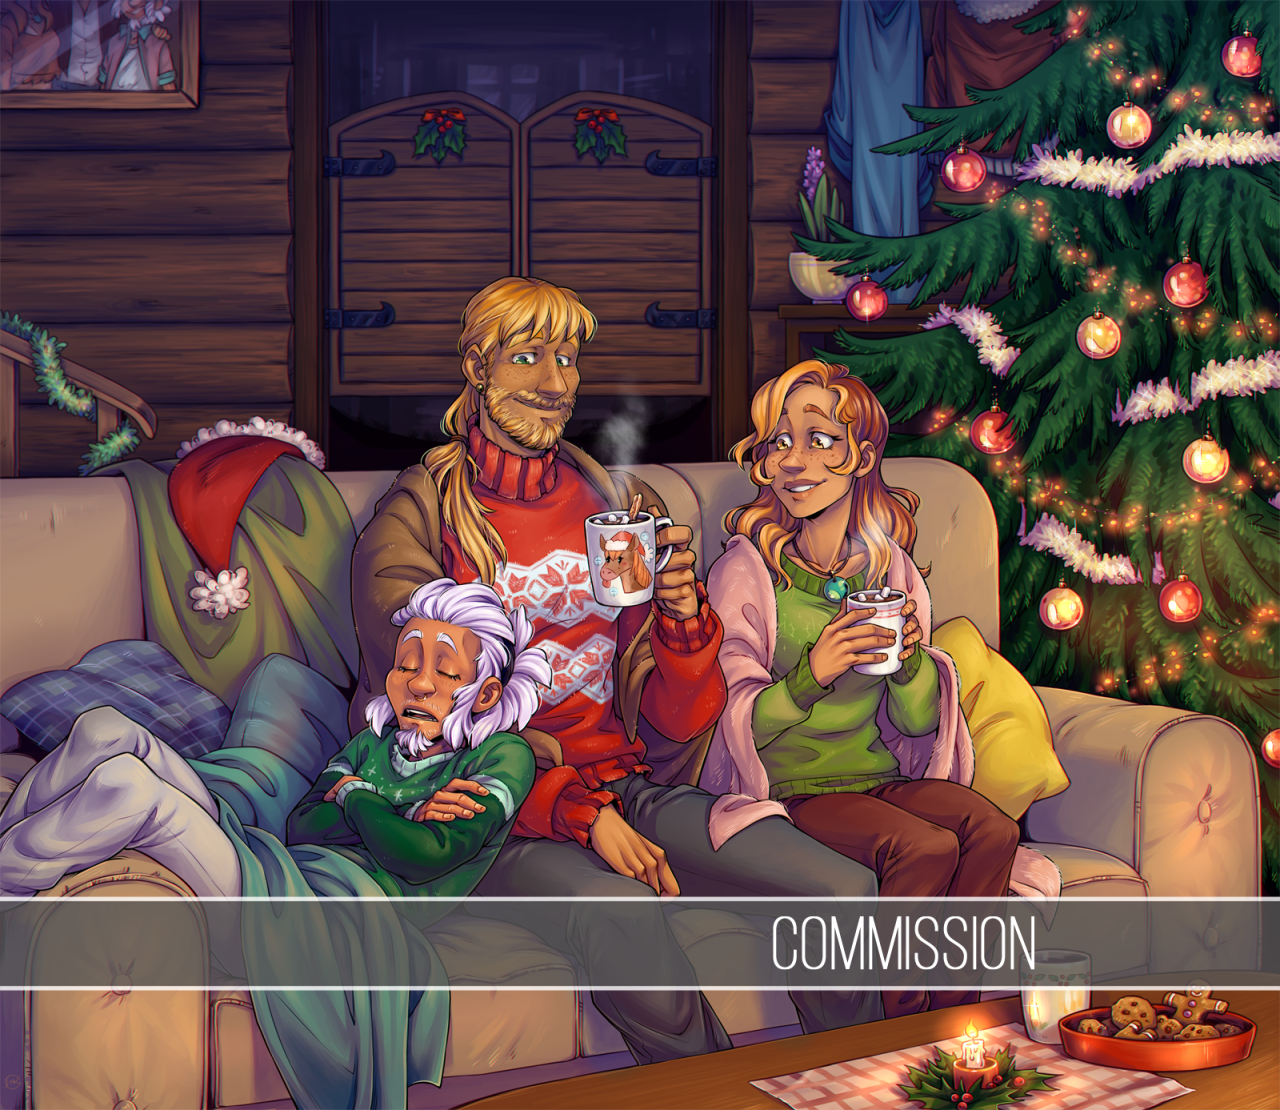 Milo, Nel and Luna are enjoying some hot cocoa in a comfort of warm plaids and each other’s company. Are you still in a festive mood?
Commission for @lottafandoms
Thank you for working with me! }: ) #Madd draws#art #artists on tumblr #illustration#picture#Commission#Art commission #not my characters #festive mood#christmas#festive sweaters